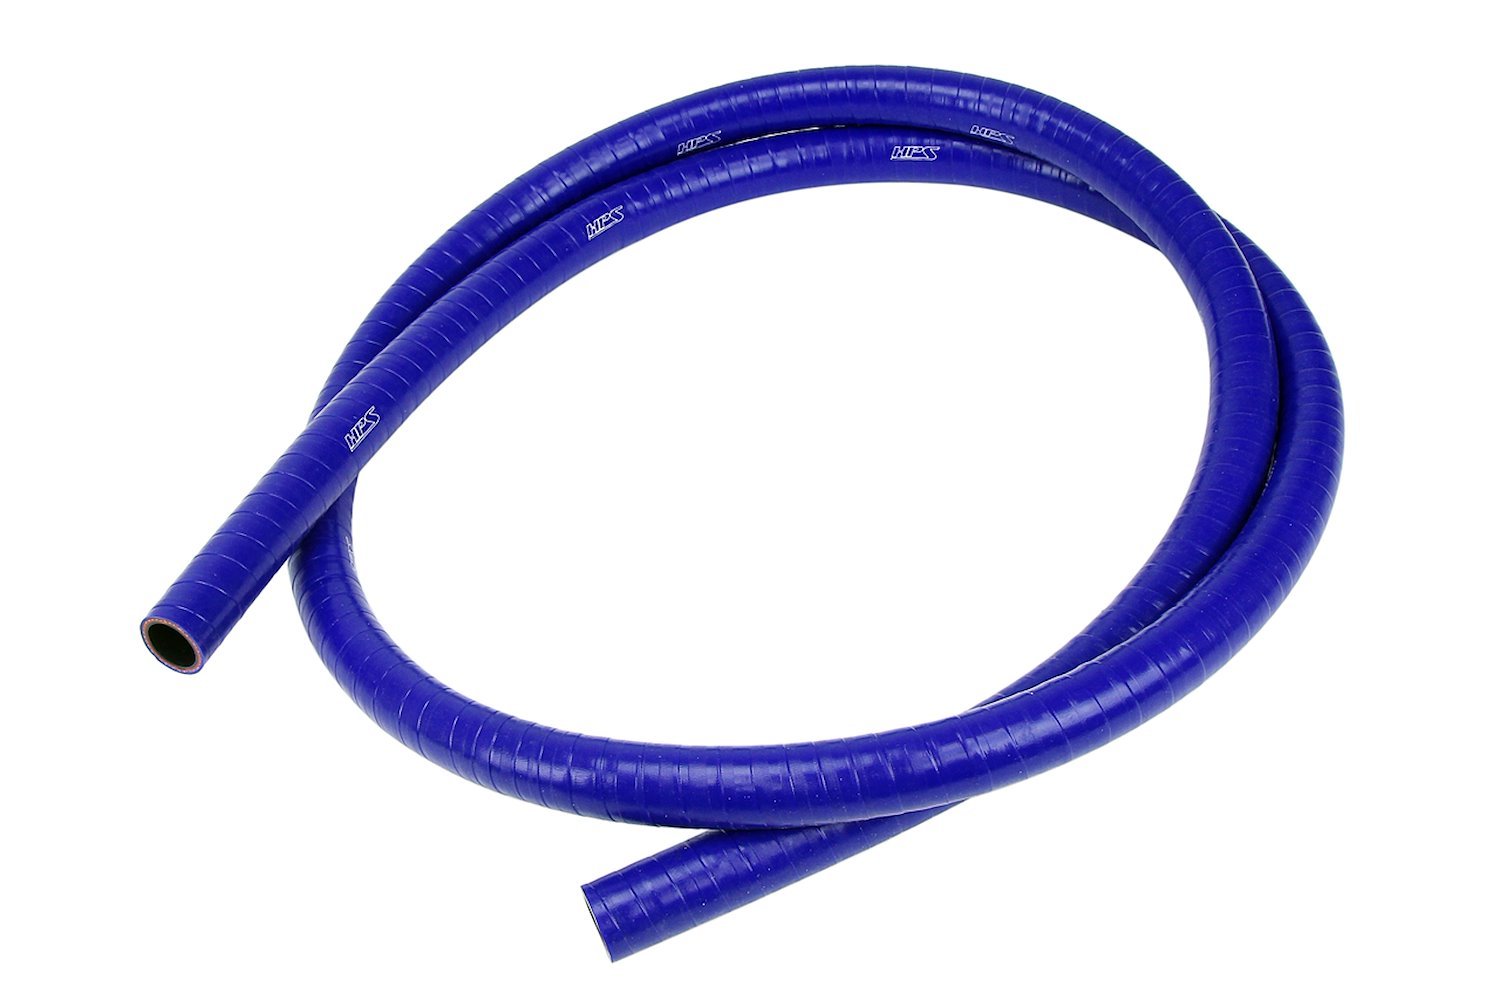 FKM-6F-075-BLUE FKM Silicone Hose, Silicone Oil Resistant Hose, High-Temp 1-Ply Reinforced, 3/4 in. ID, 6 ft. Long, Blue